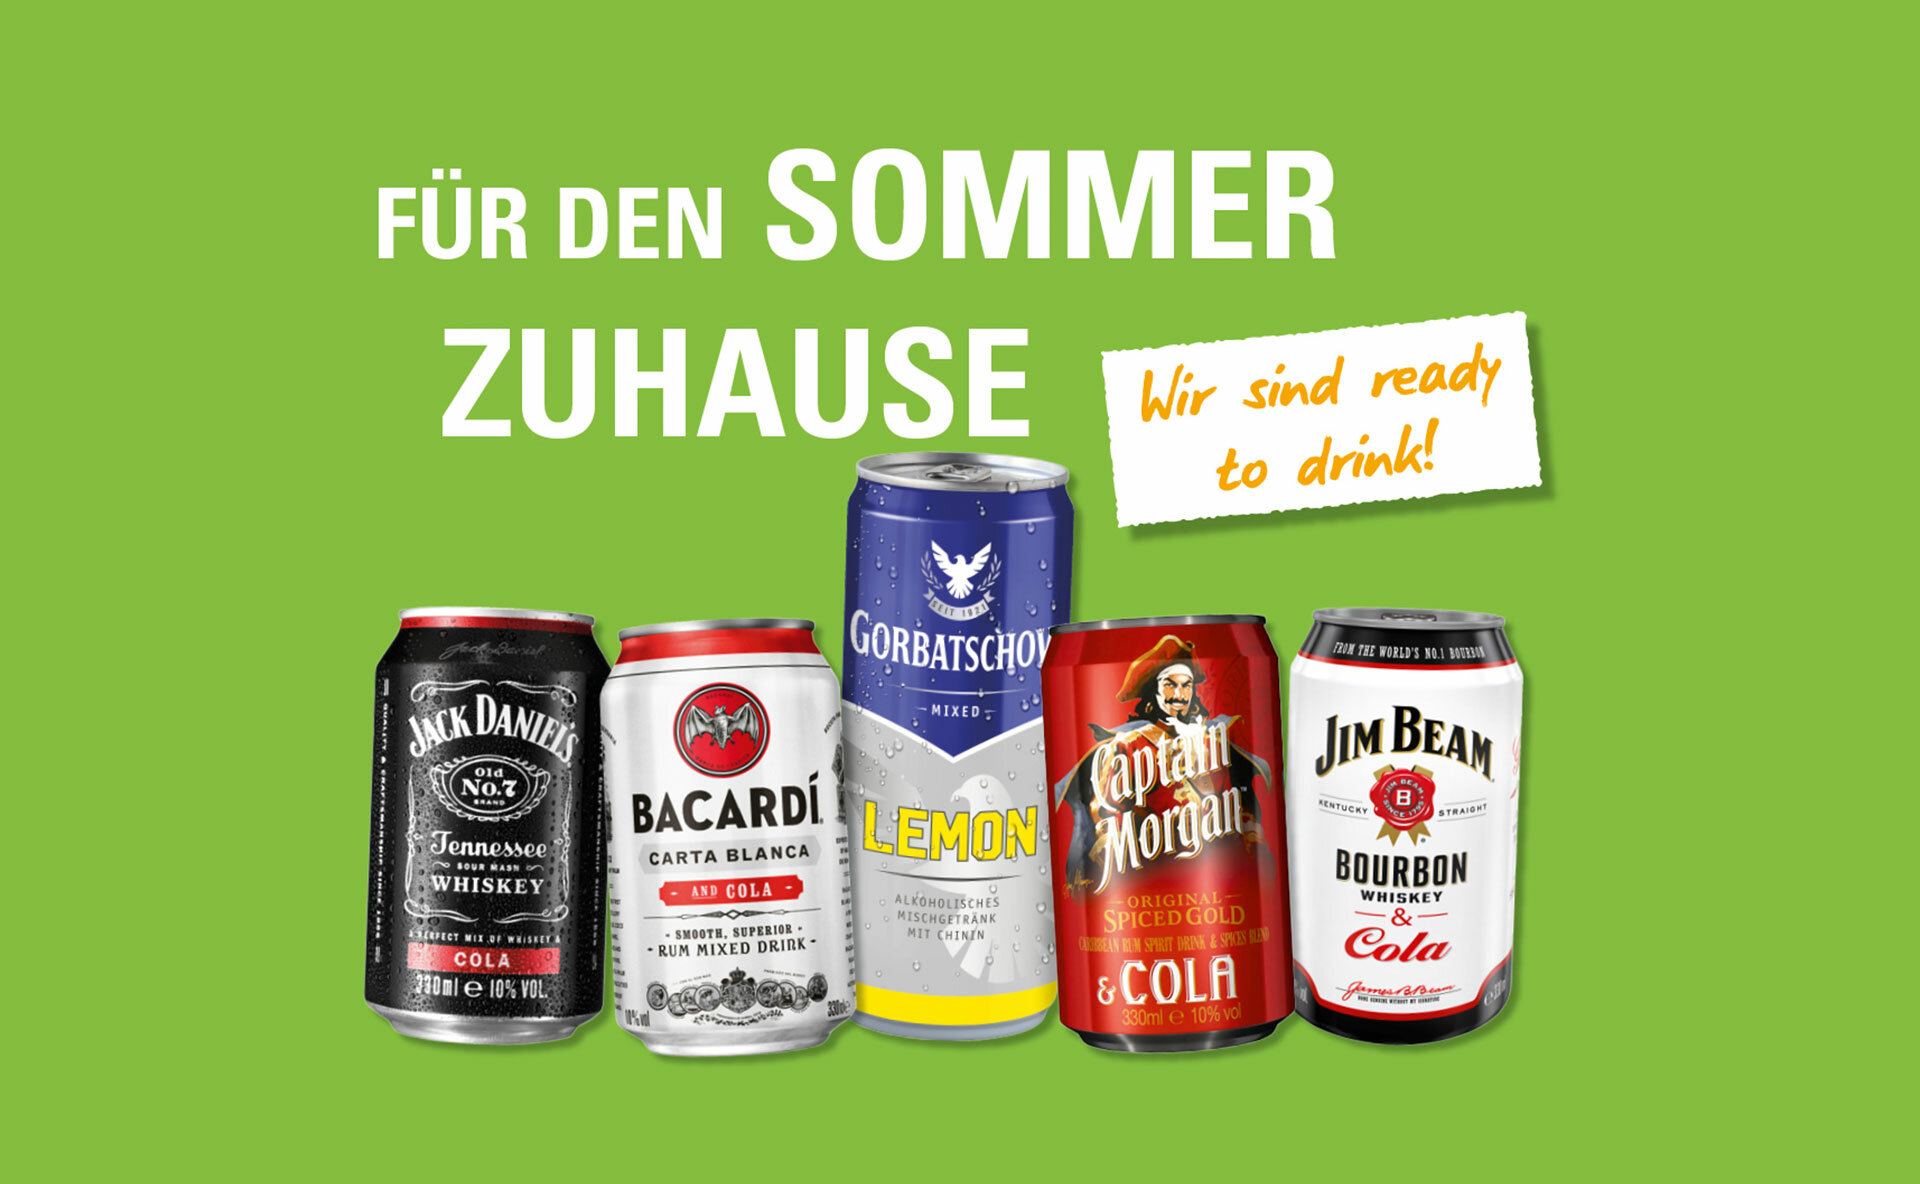 Sommer zuhause Cocktails ready-to-drink